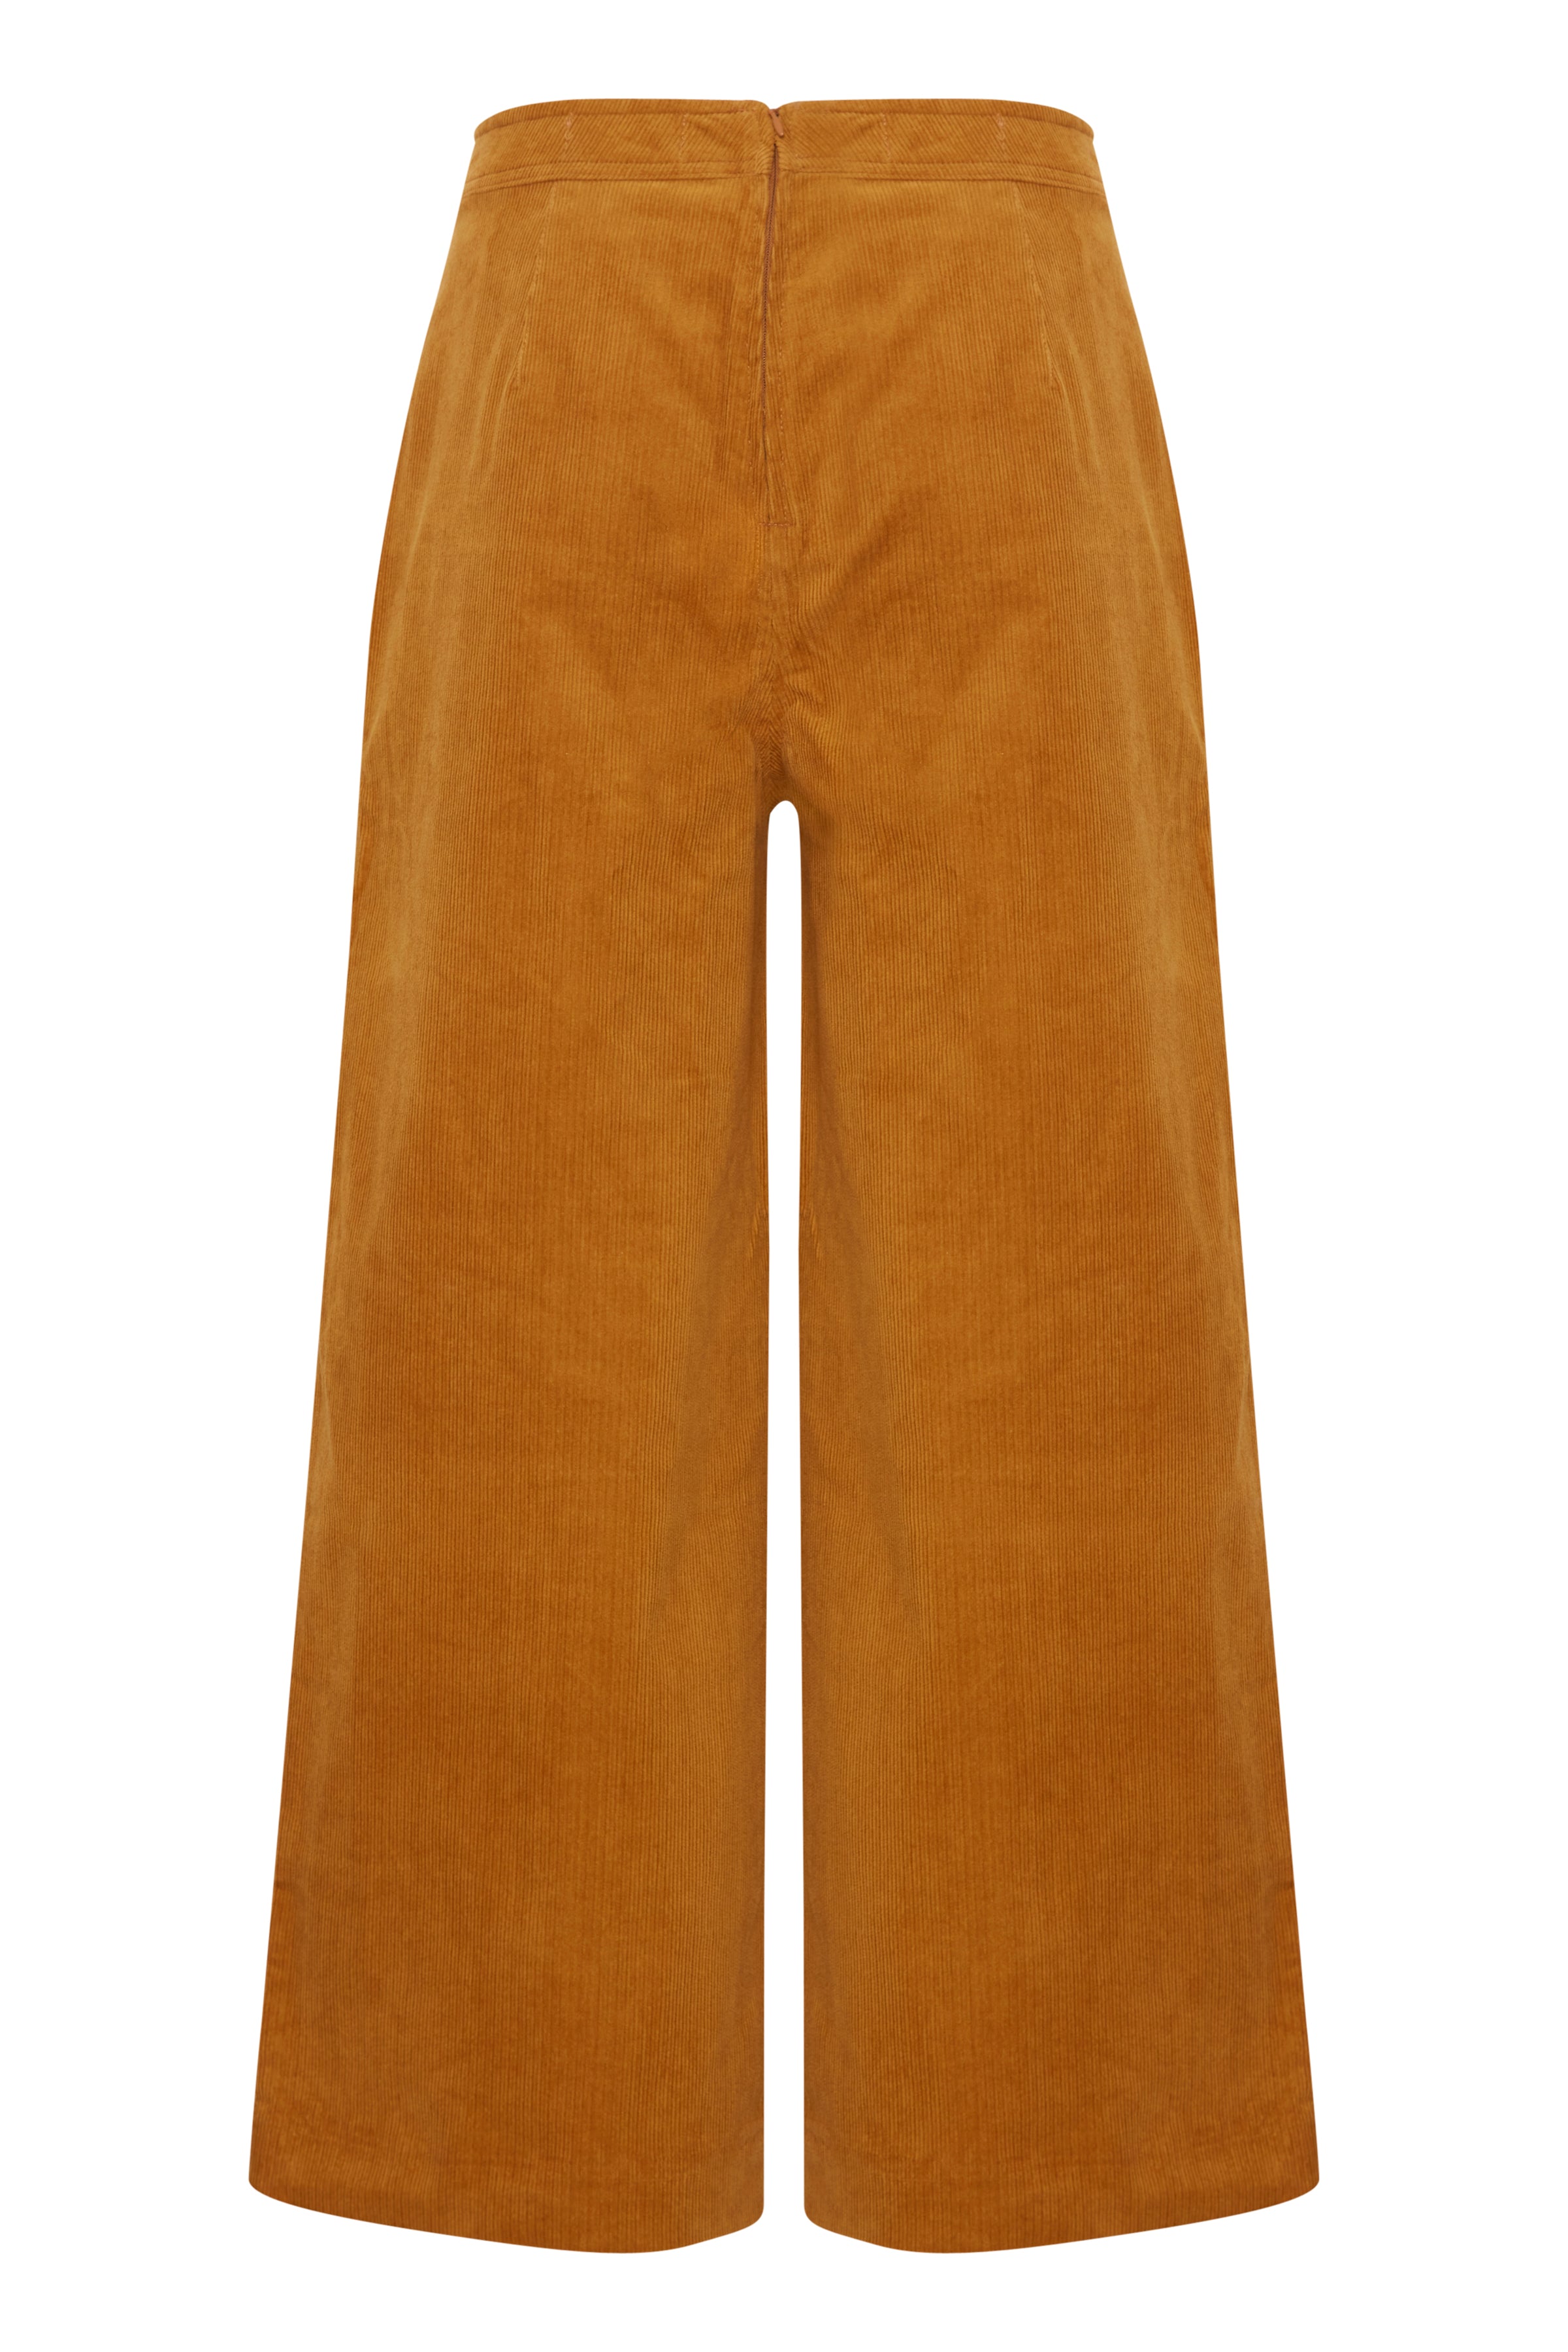 IHCassia Trousers